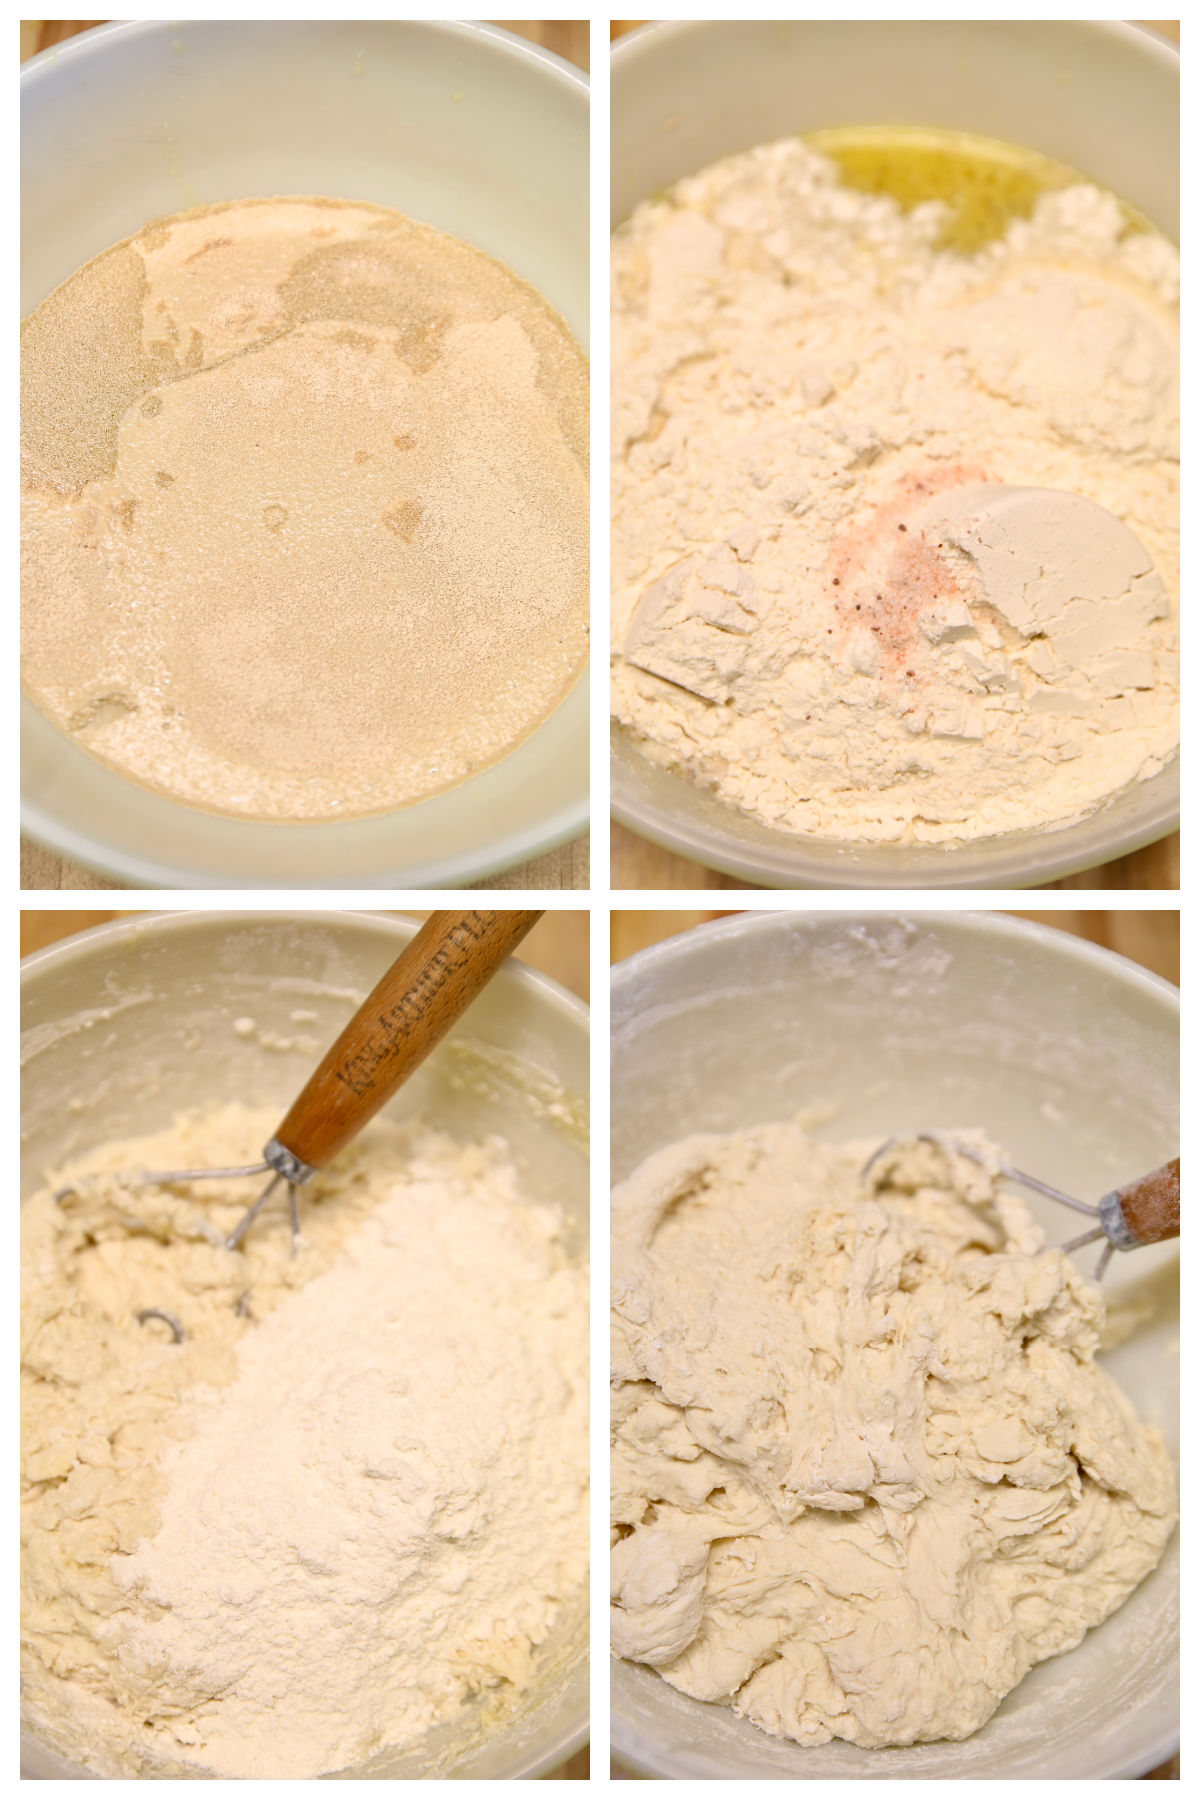 Collage making yeast dough.